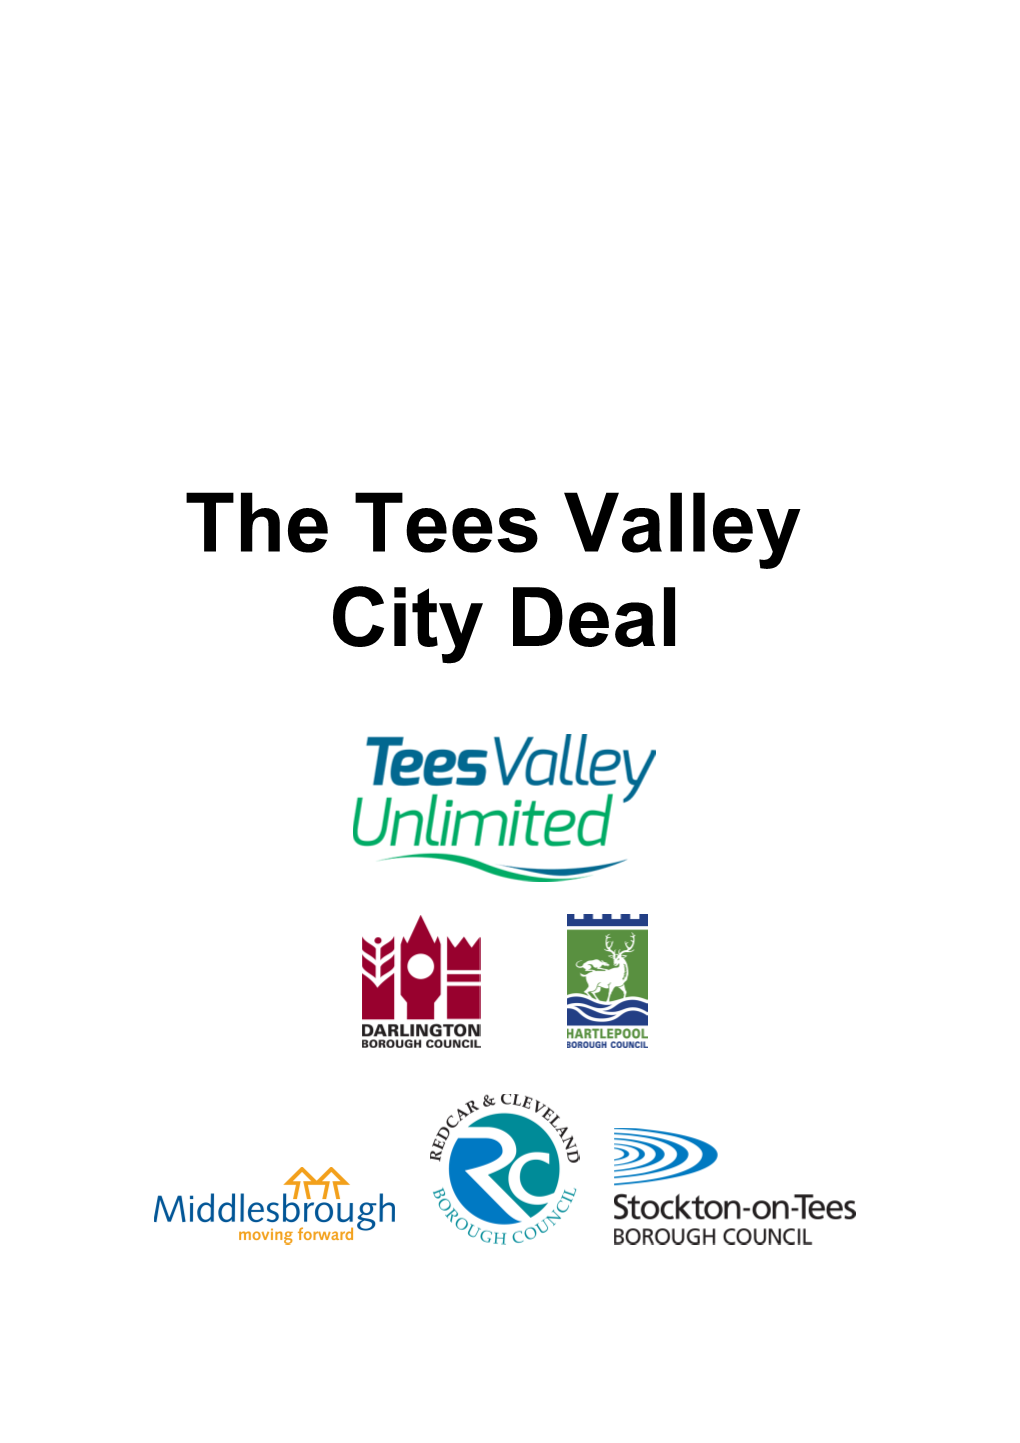 The Tees Valley